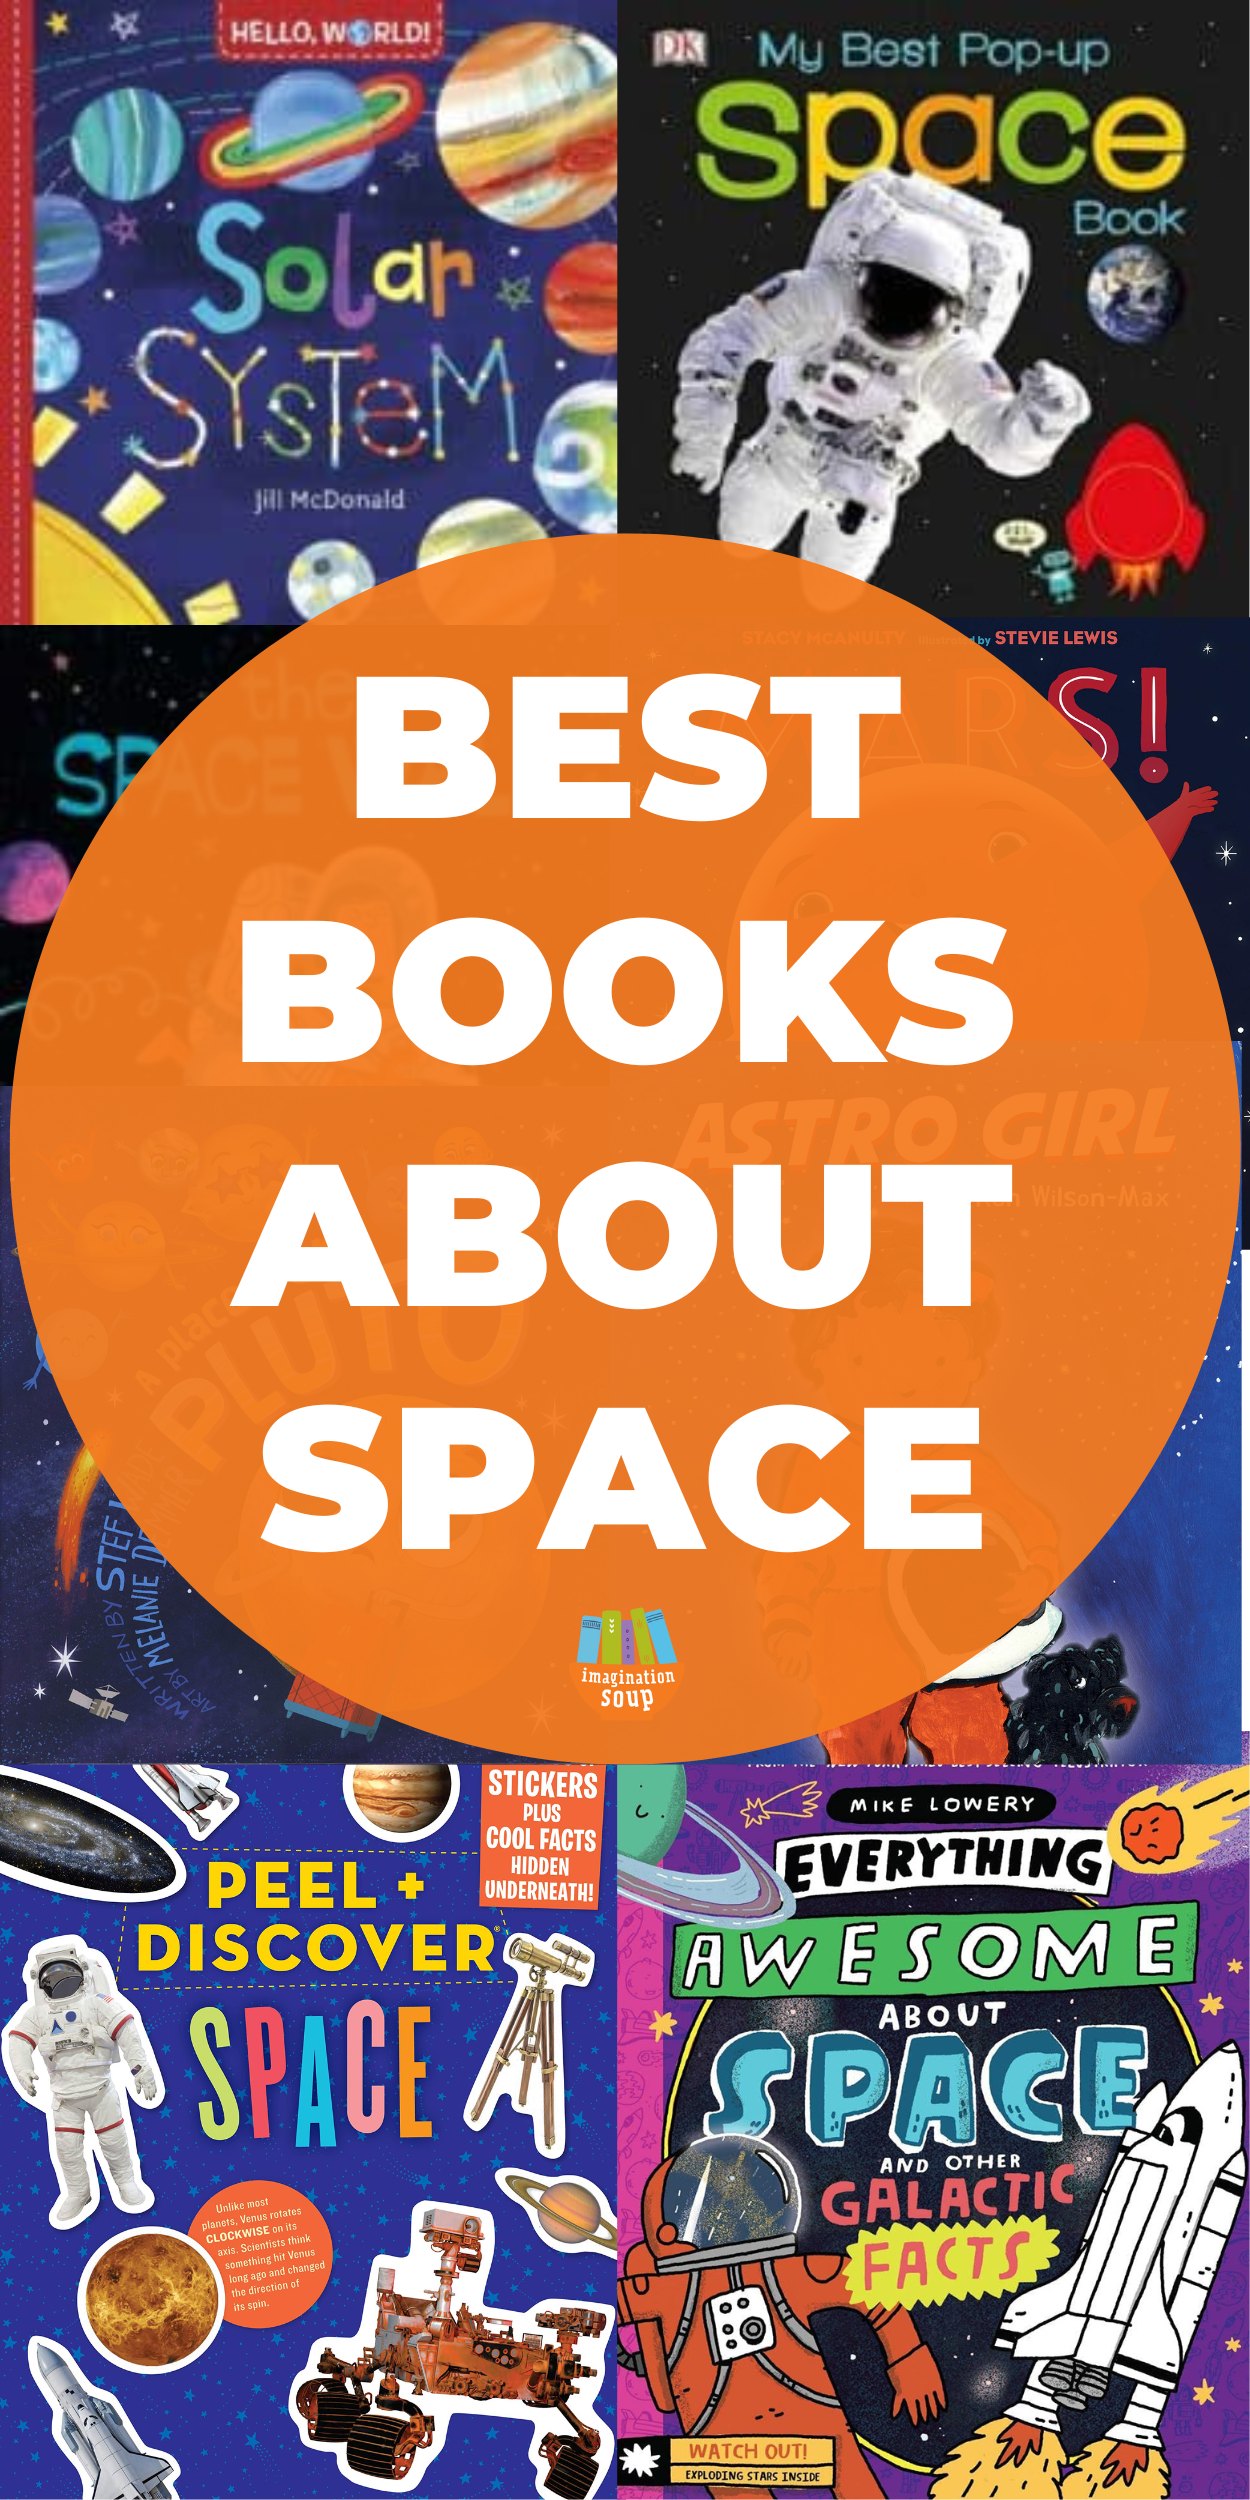 Read the best books about solar system for kids. Learn about the planets, stars, moon, space travel, the planets in our solar system, and more. Why? Because space is endlessly fascinating!